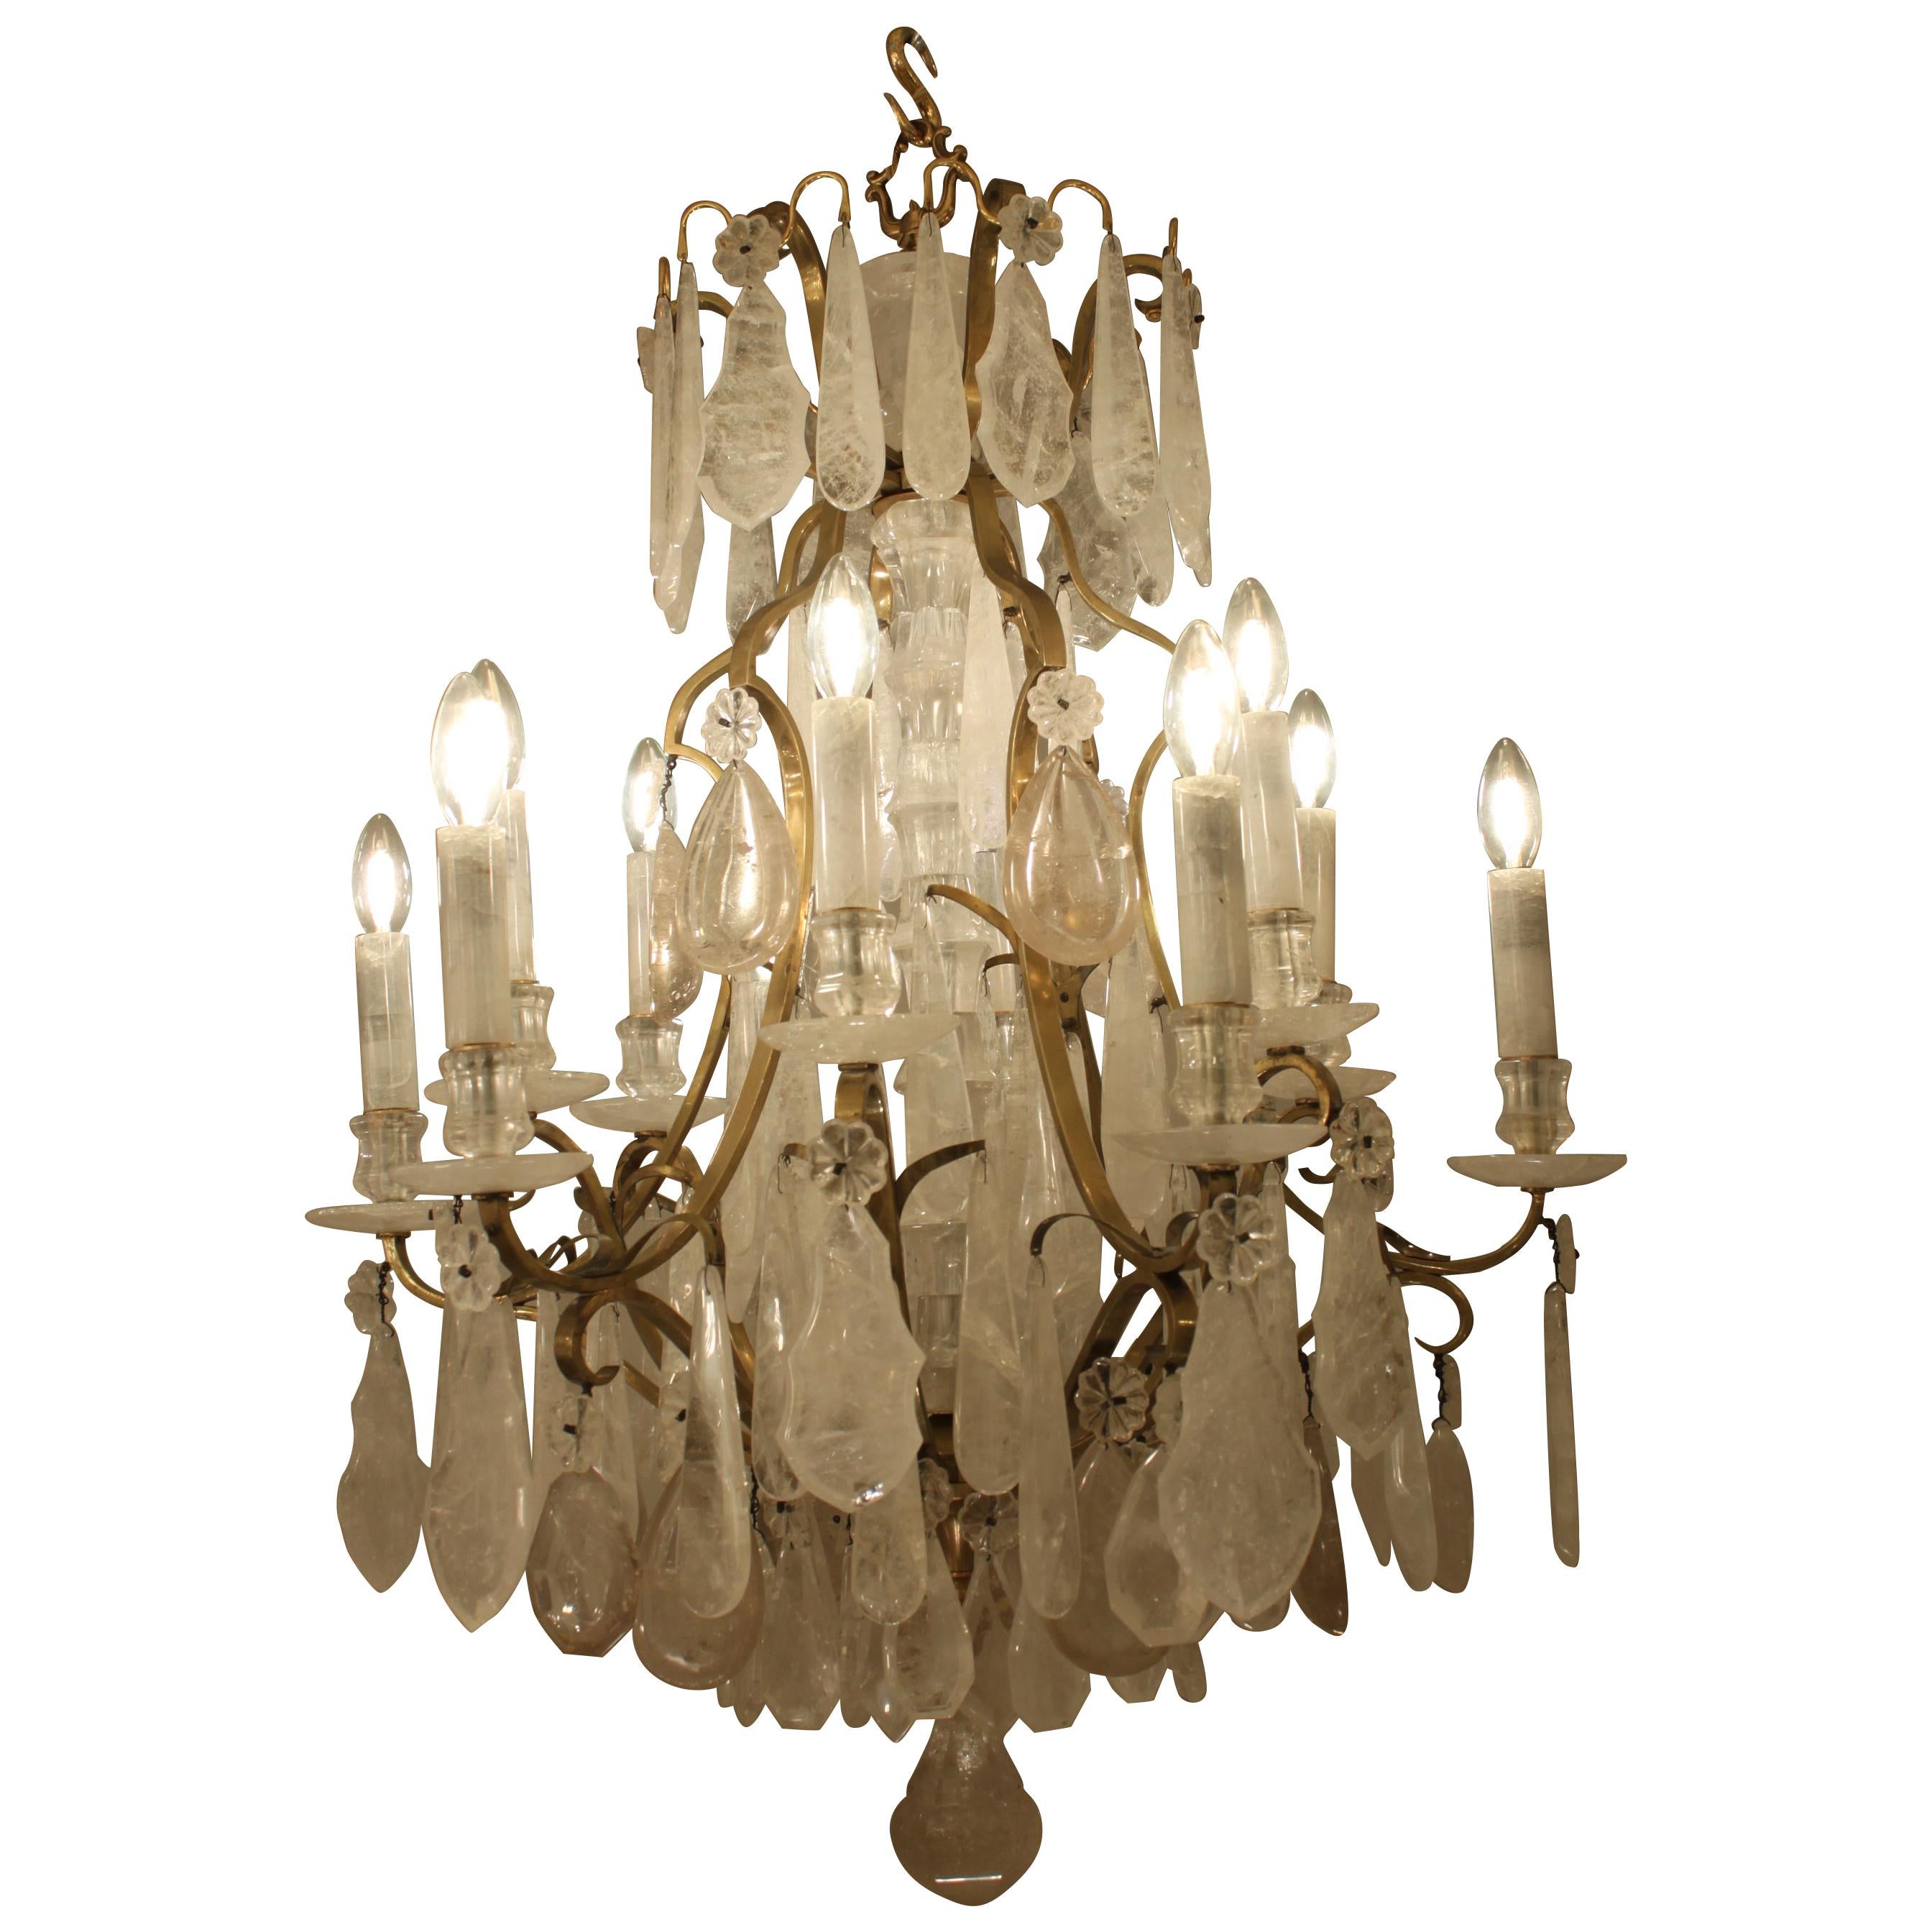 French Rock Crystal Chandelier, c1880